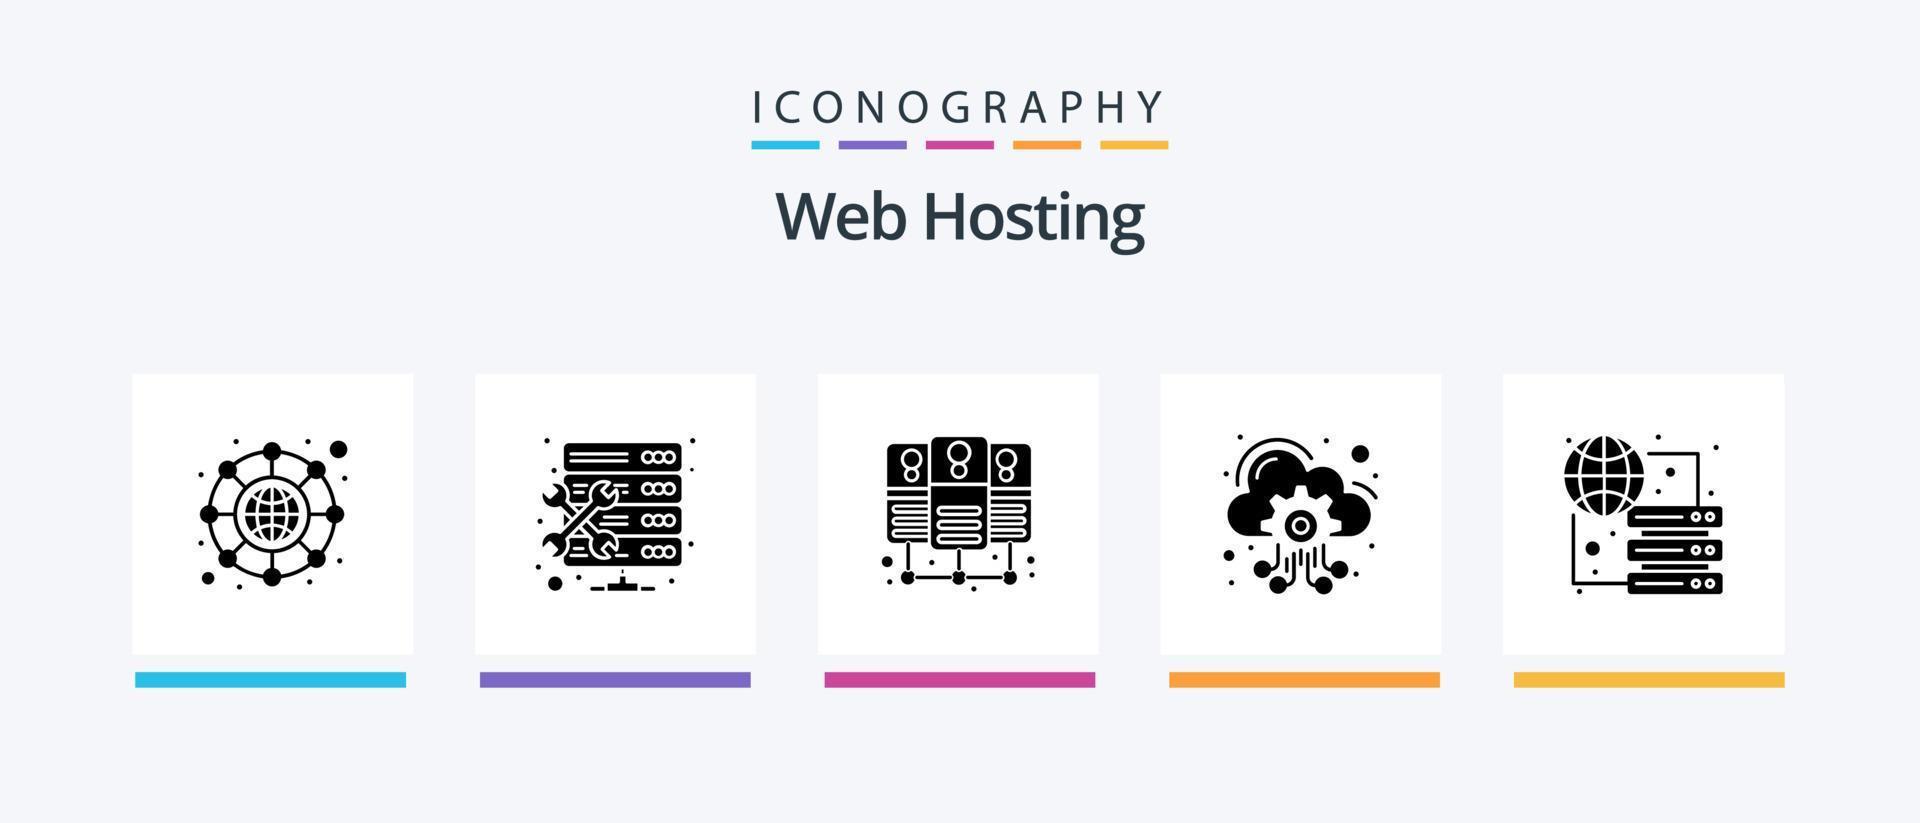 Web Hosting Glyph 5 Icon Pack Including server. global. server hosting. connect. hosting server. Creative Icons Design vector